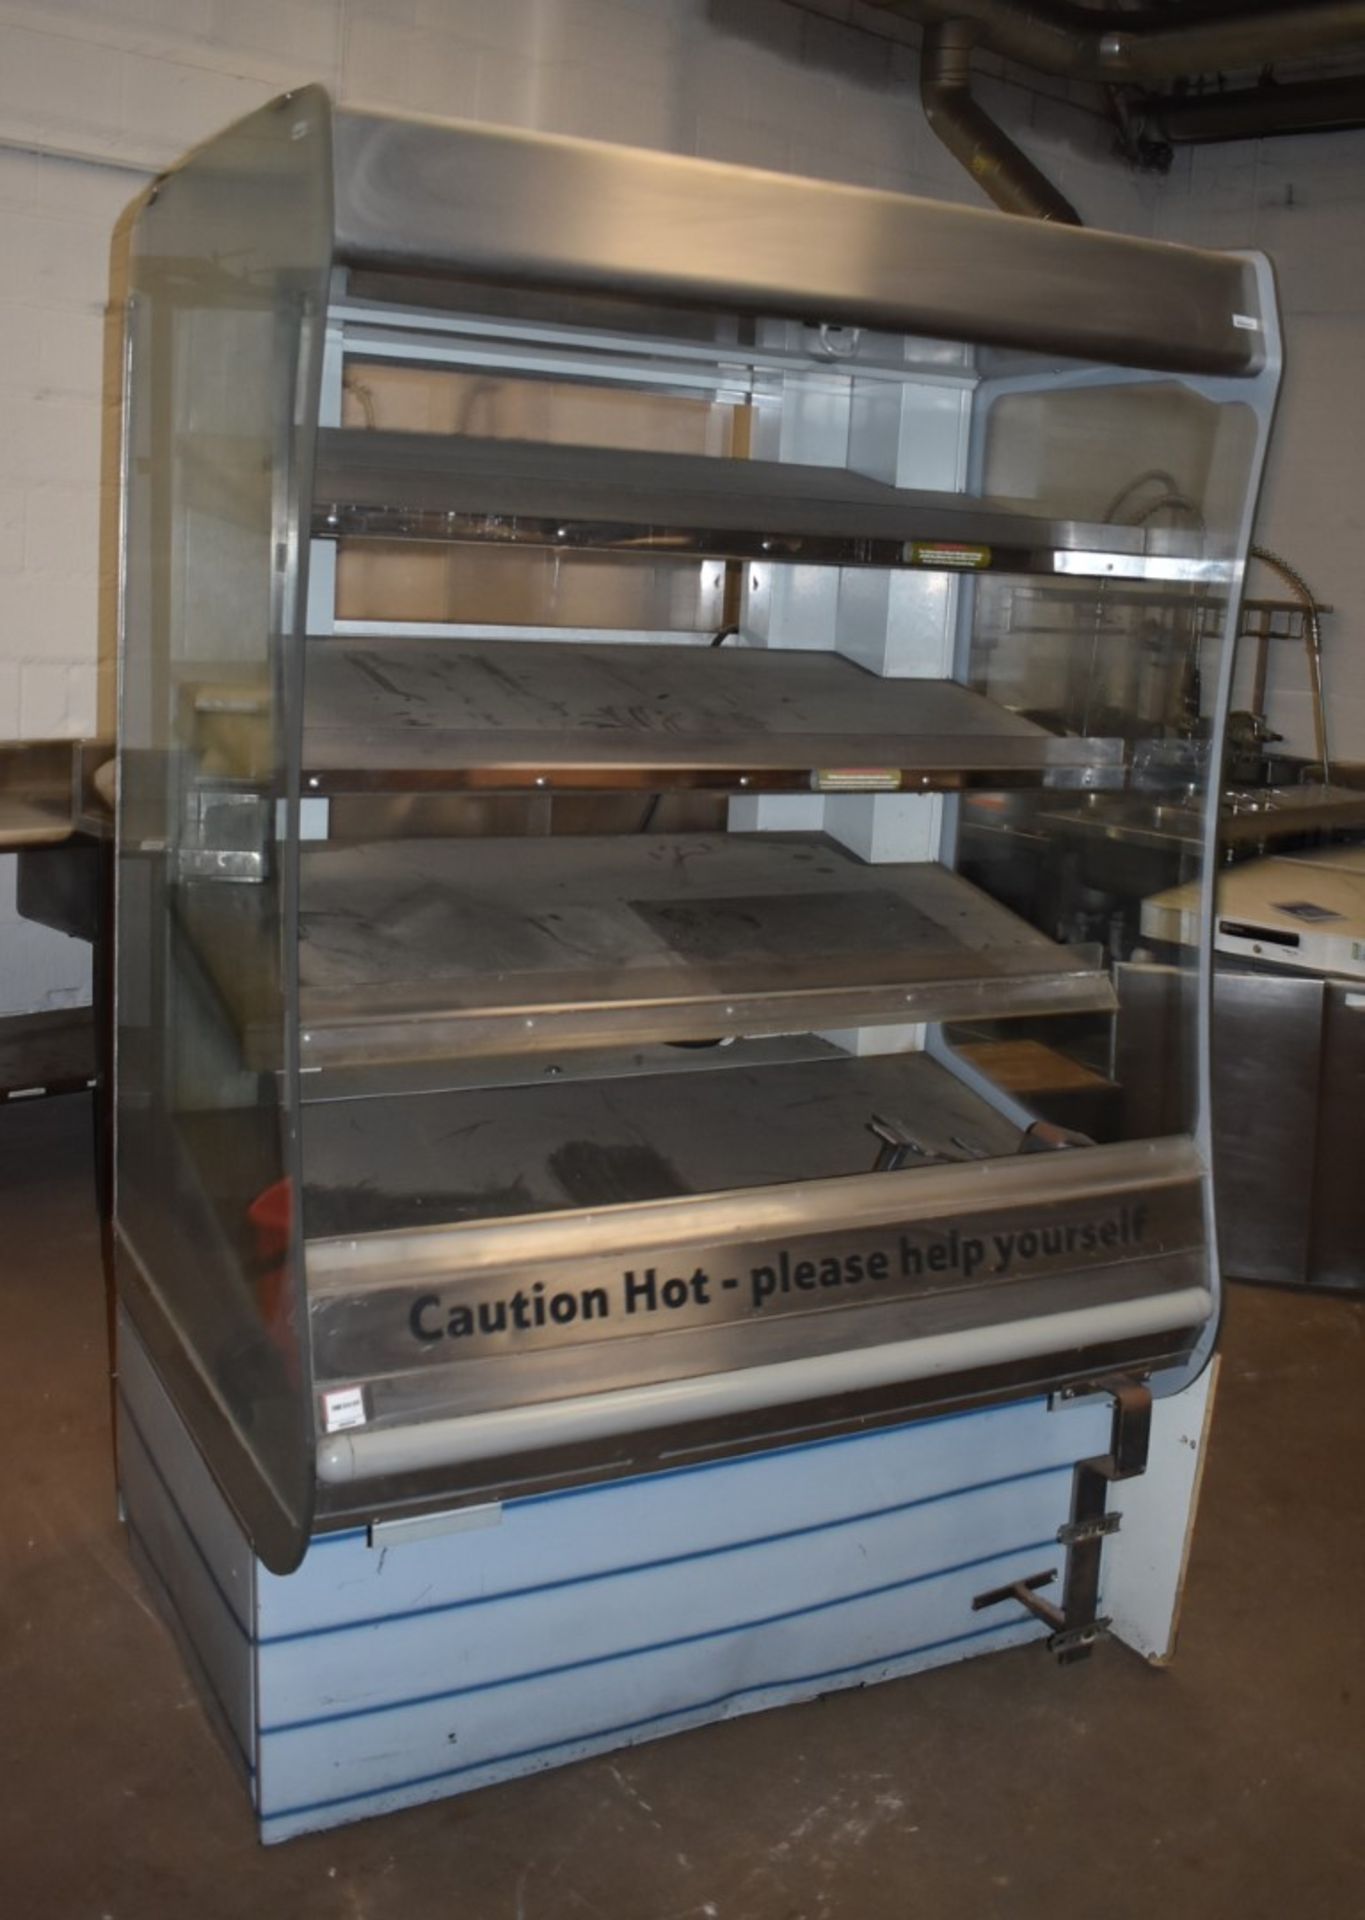 1 x BKI MHC4 Multi-Tier Heated Merchandise Grab and Go Unit With Rear Access Doors - 230v -